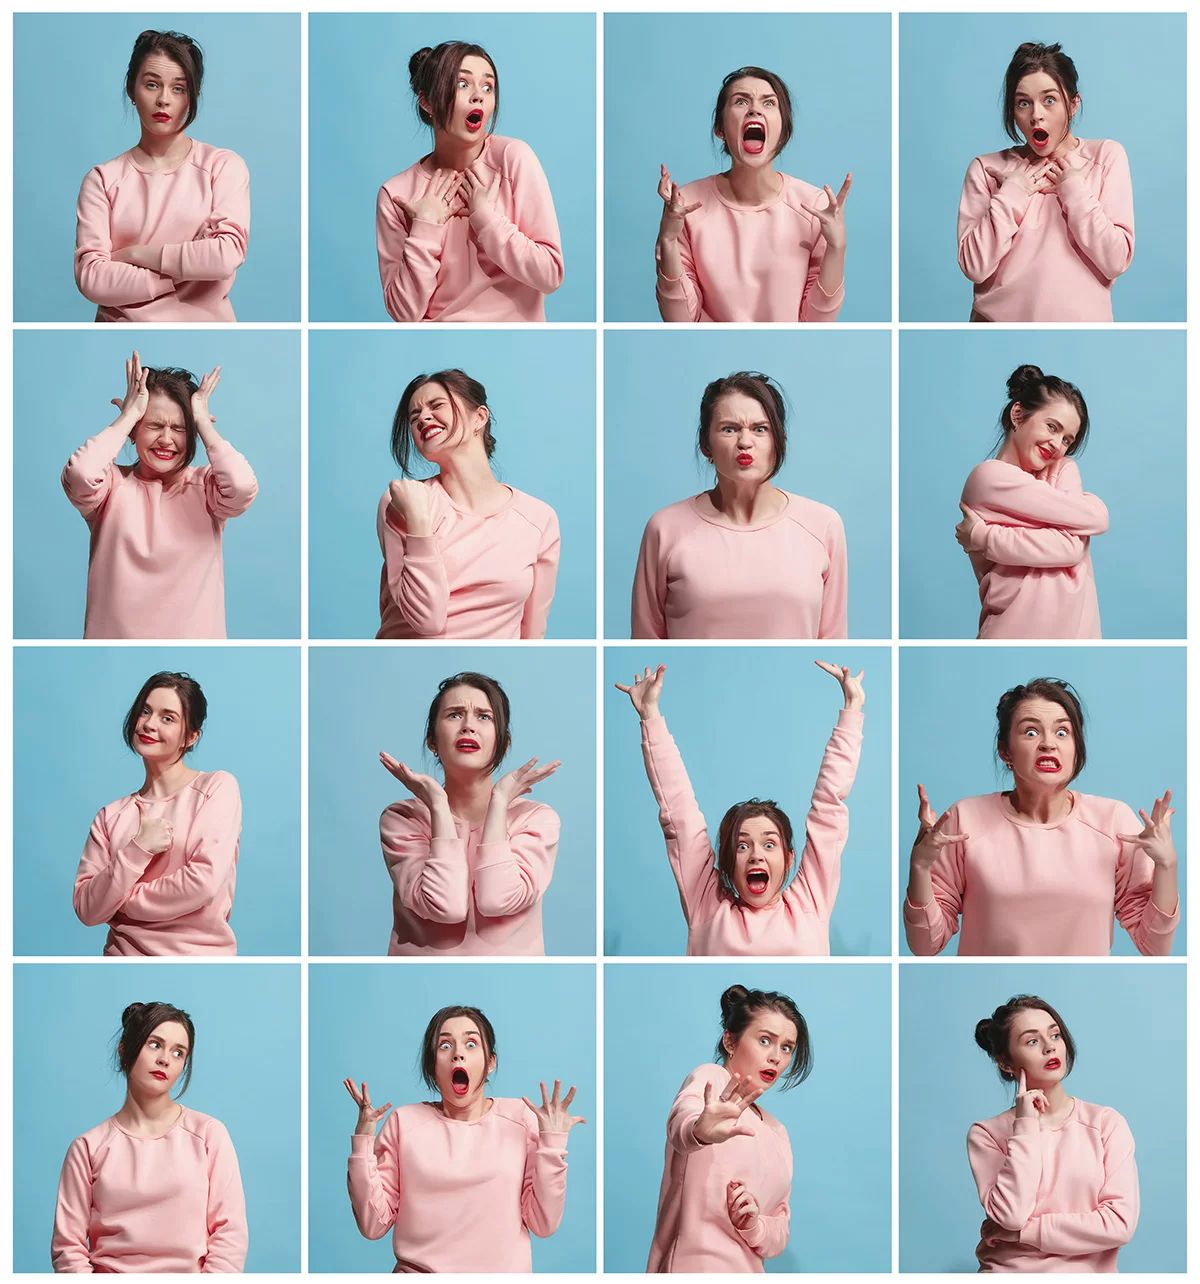 the many emotions of a woman